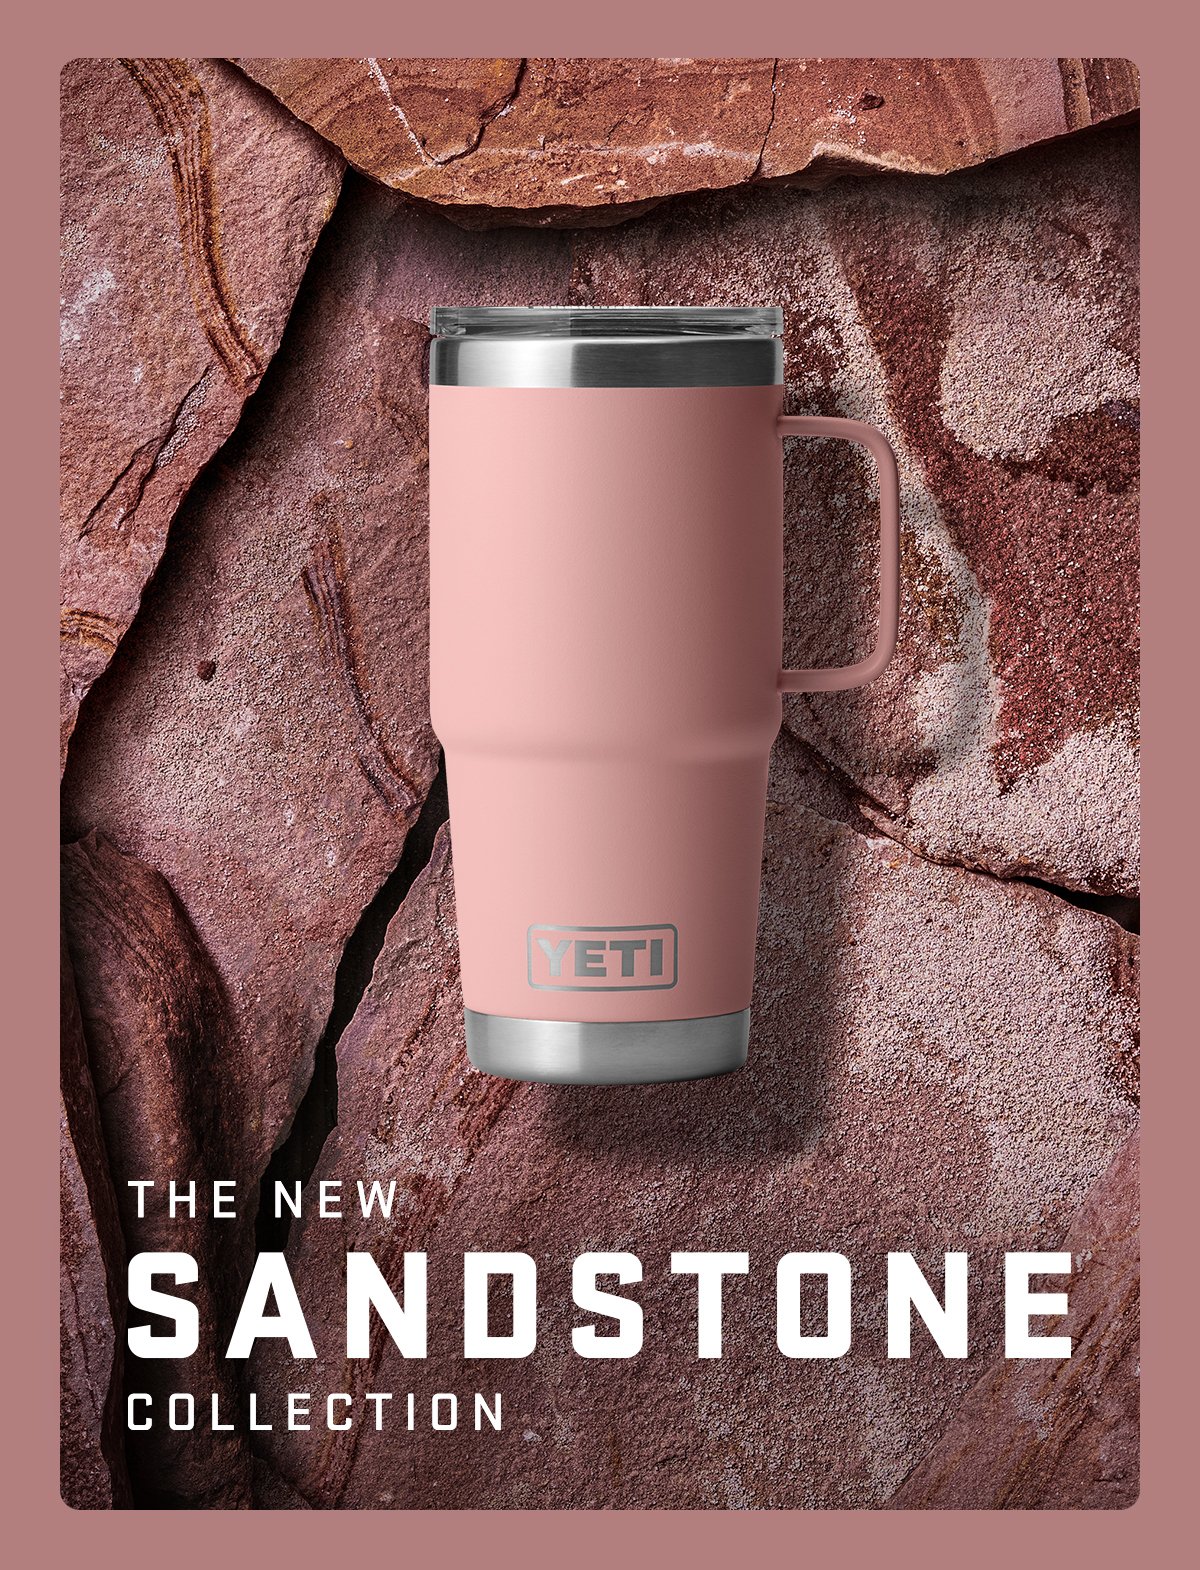 YETI now comes in Sandstone Pink